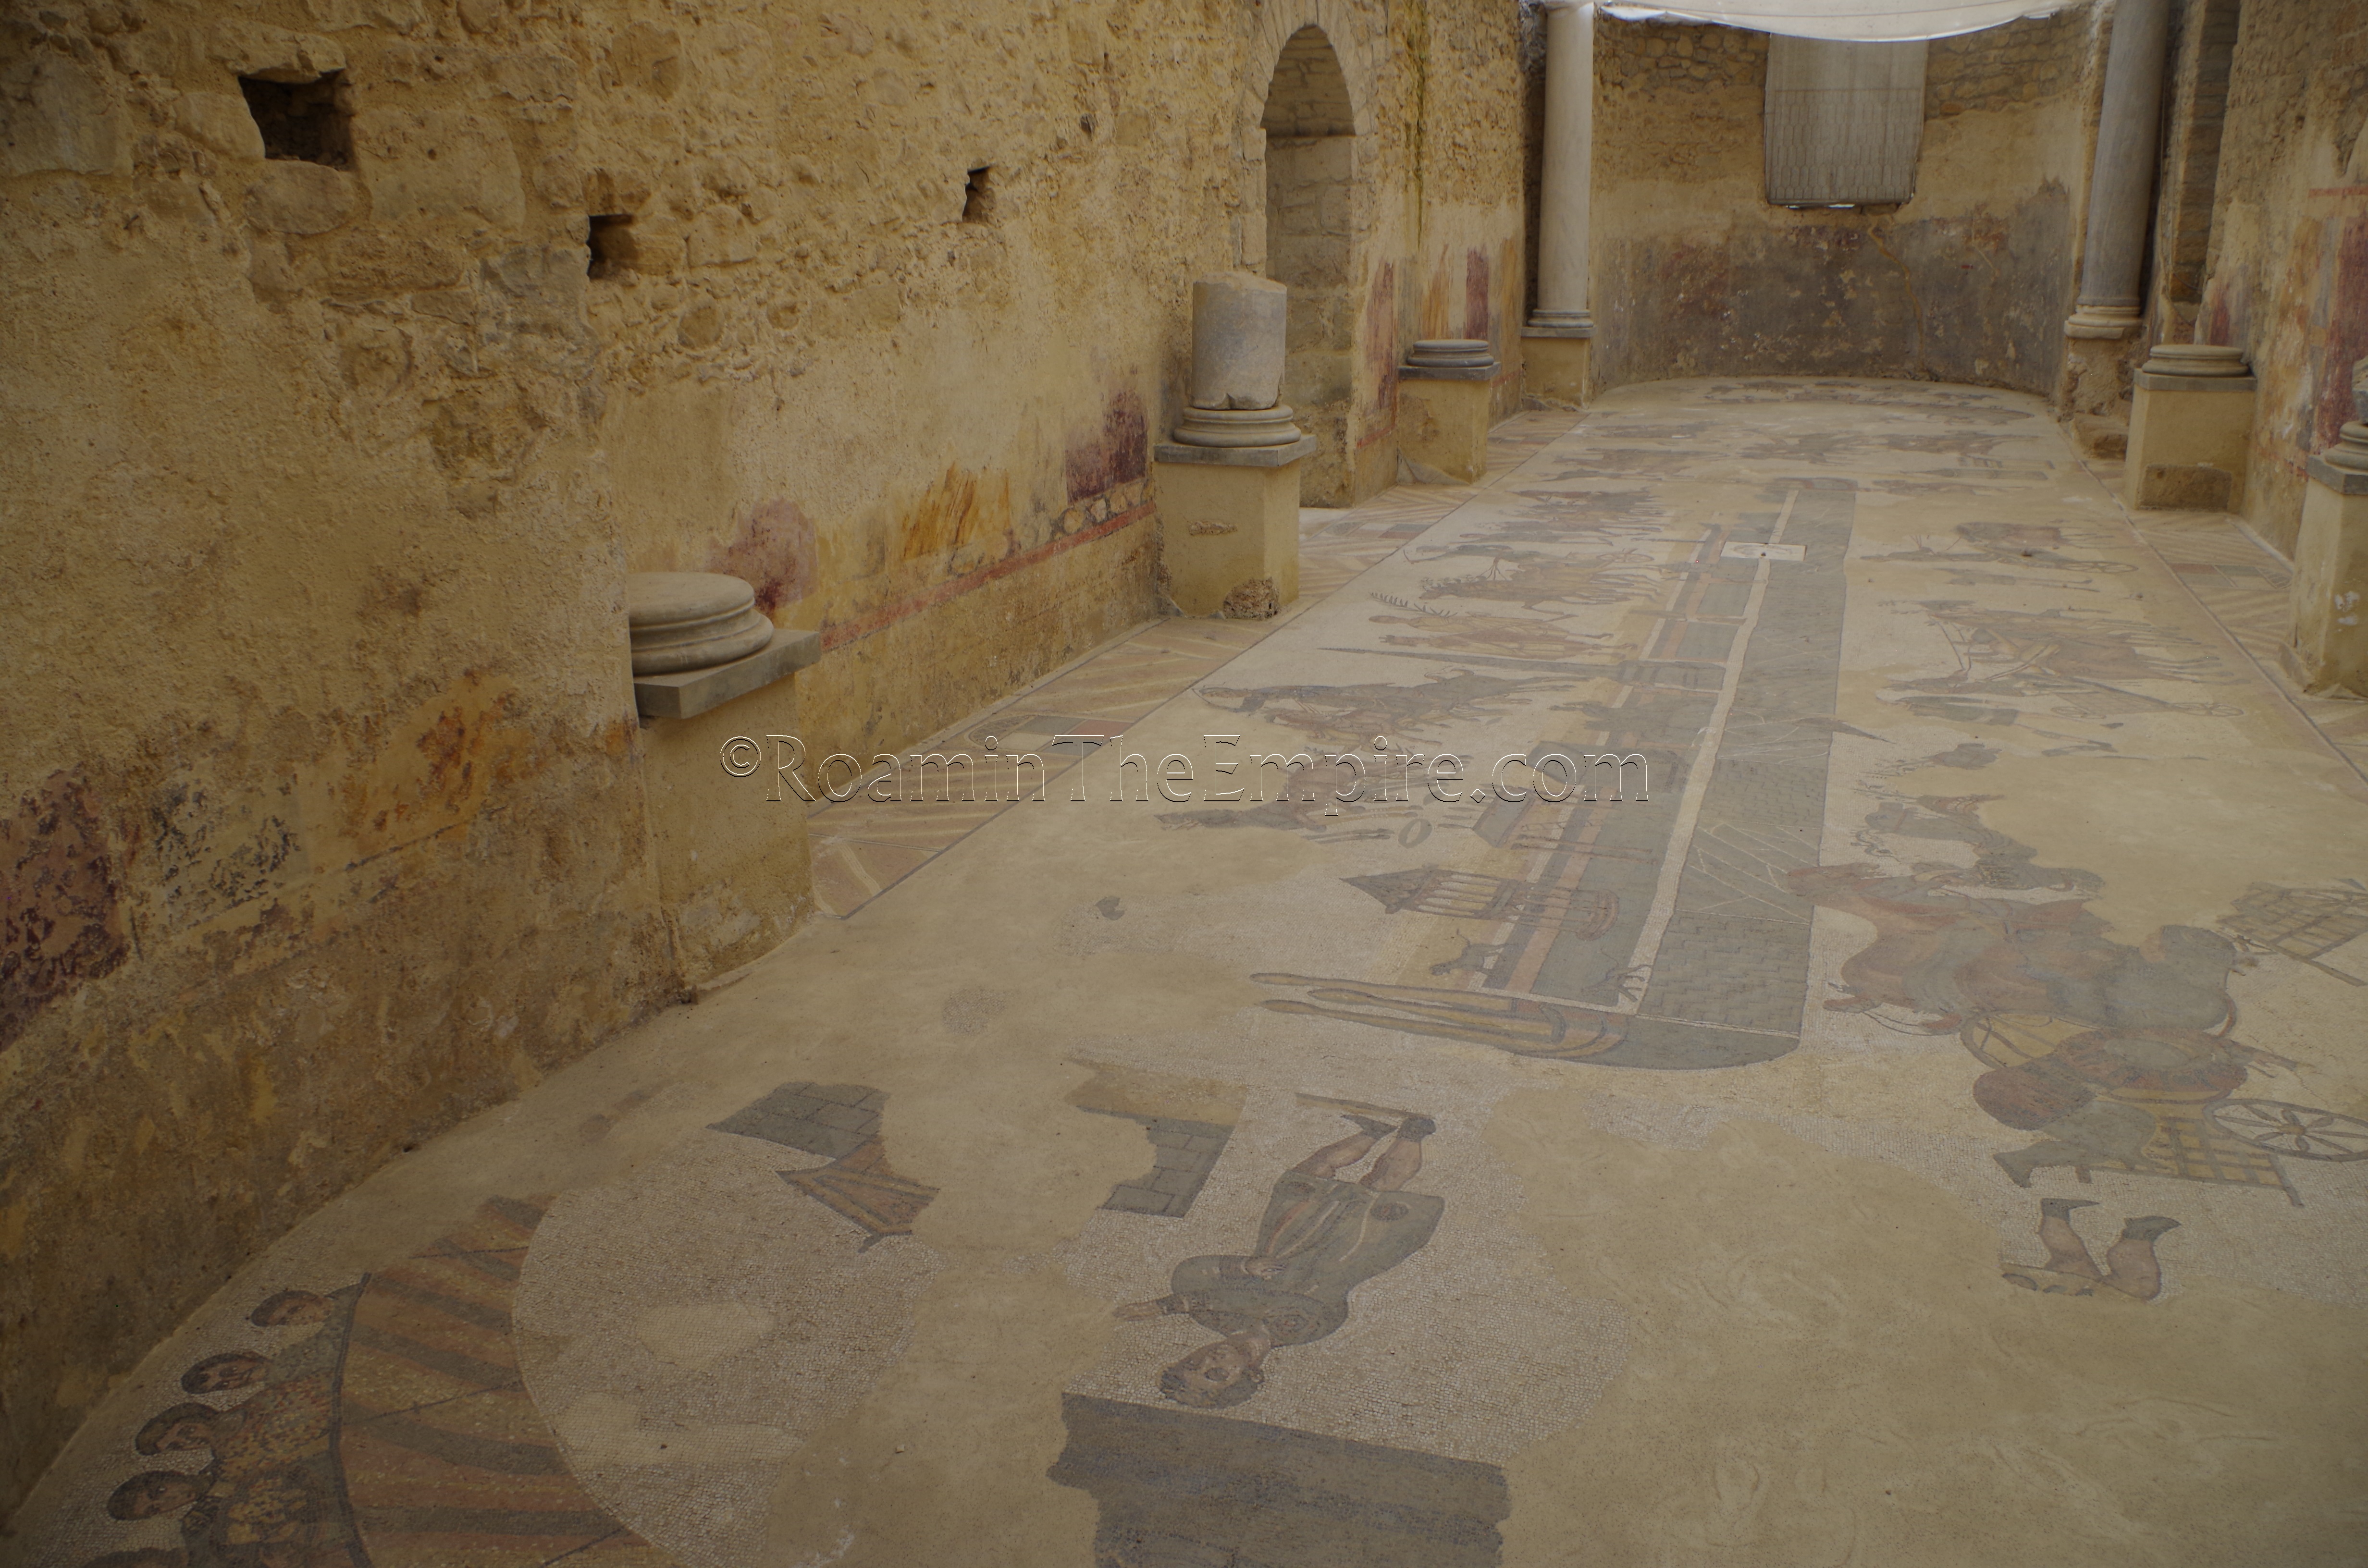 The Circus Maximus mosaic from the two-apse room in the villa's bathing complex.